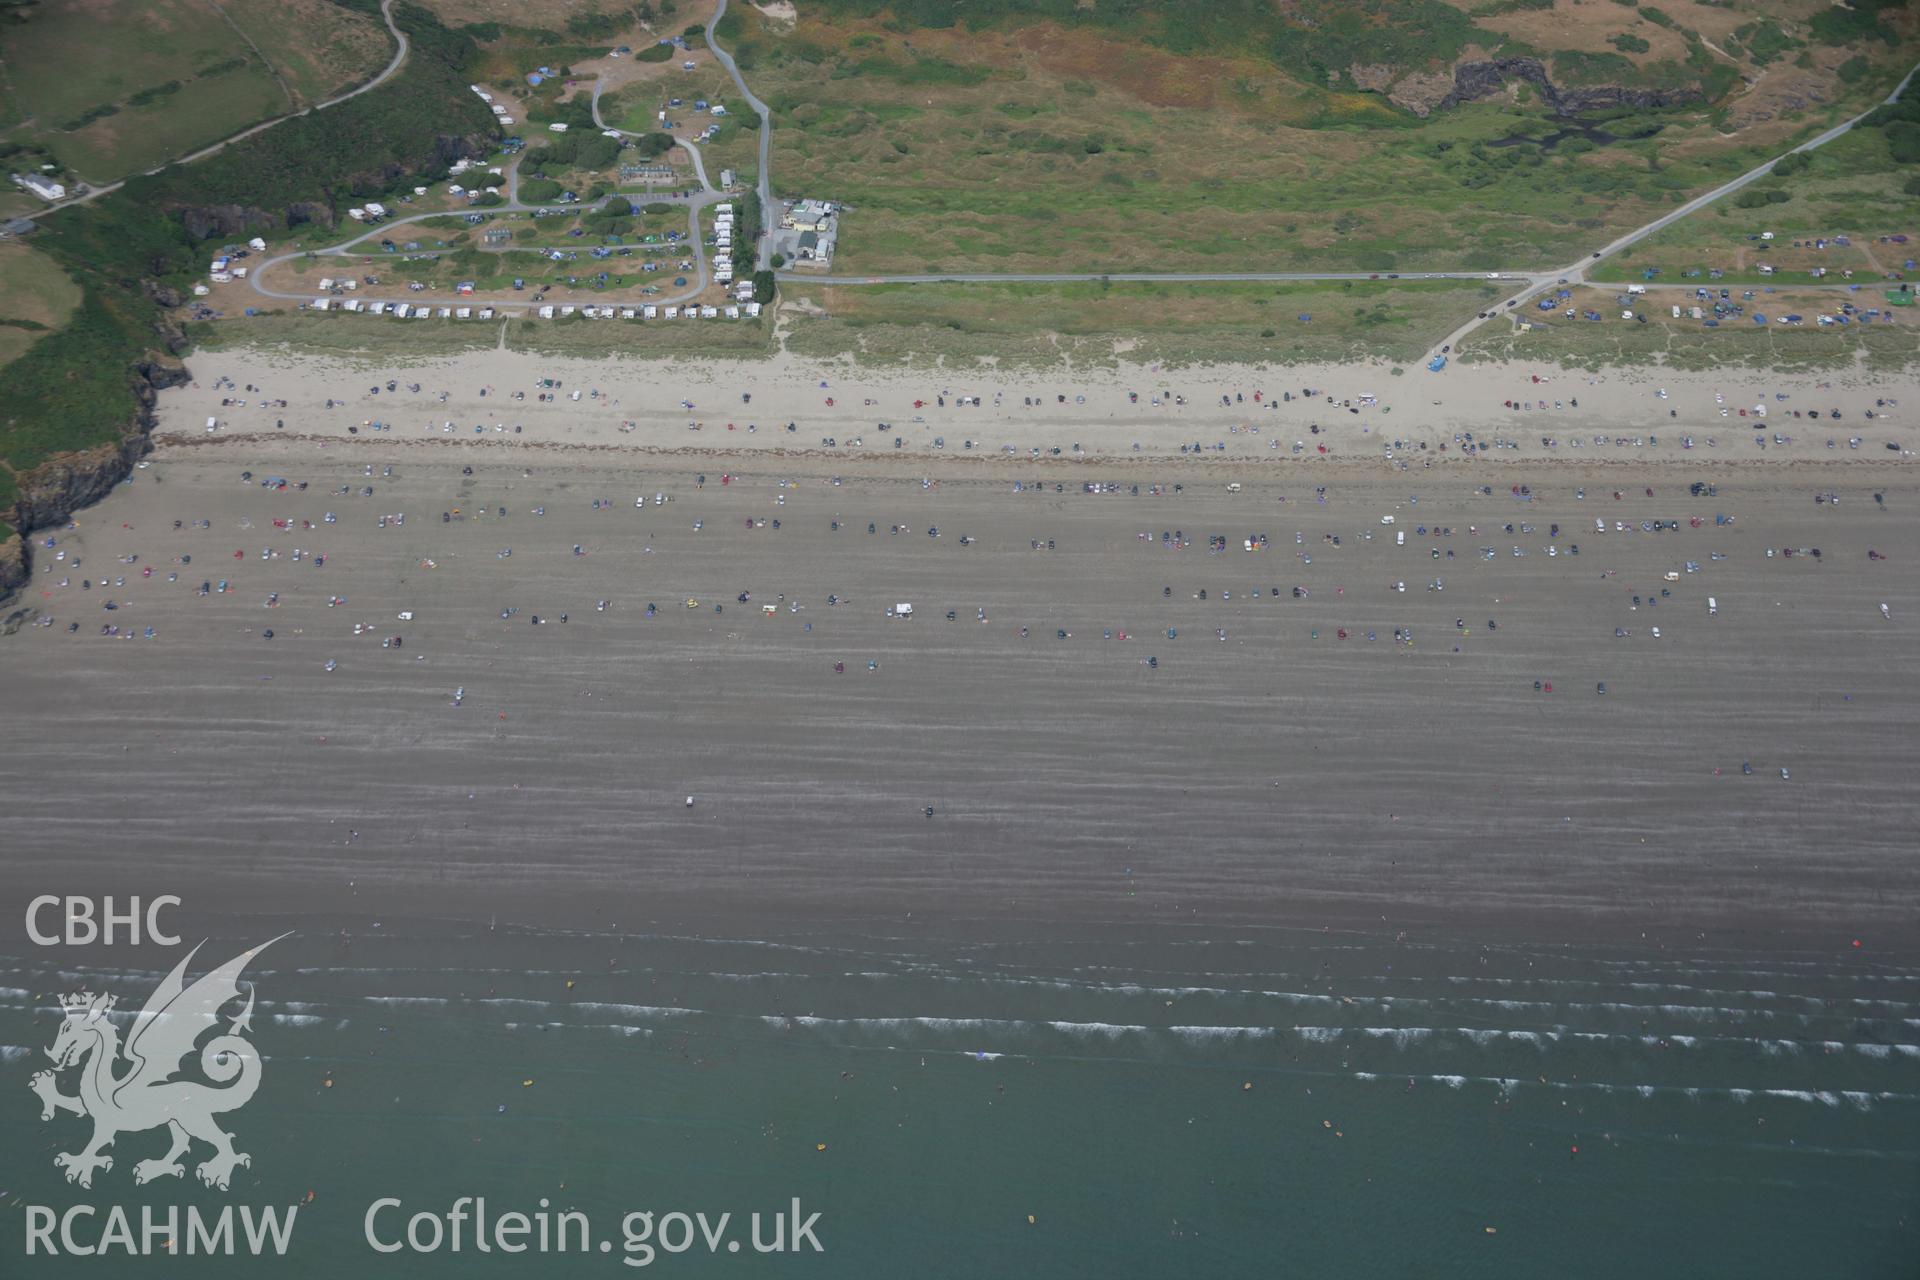 RCAHMW colour oblique aerial photograph of Black Rock Sands Taken on 25 July 2006 by Toby Driver.